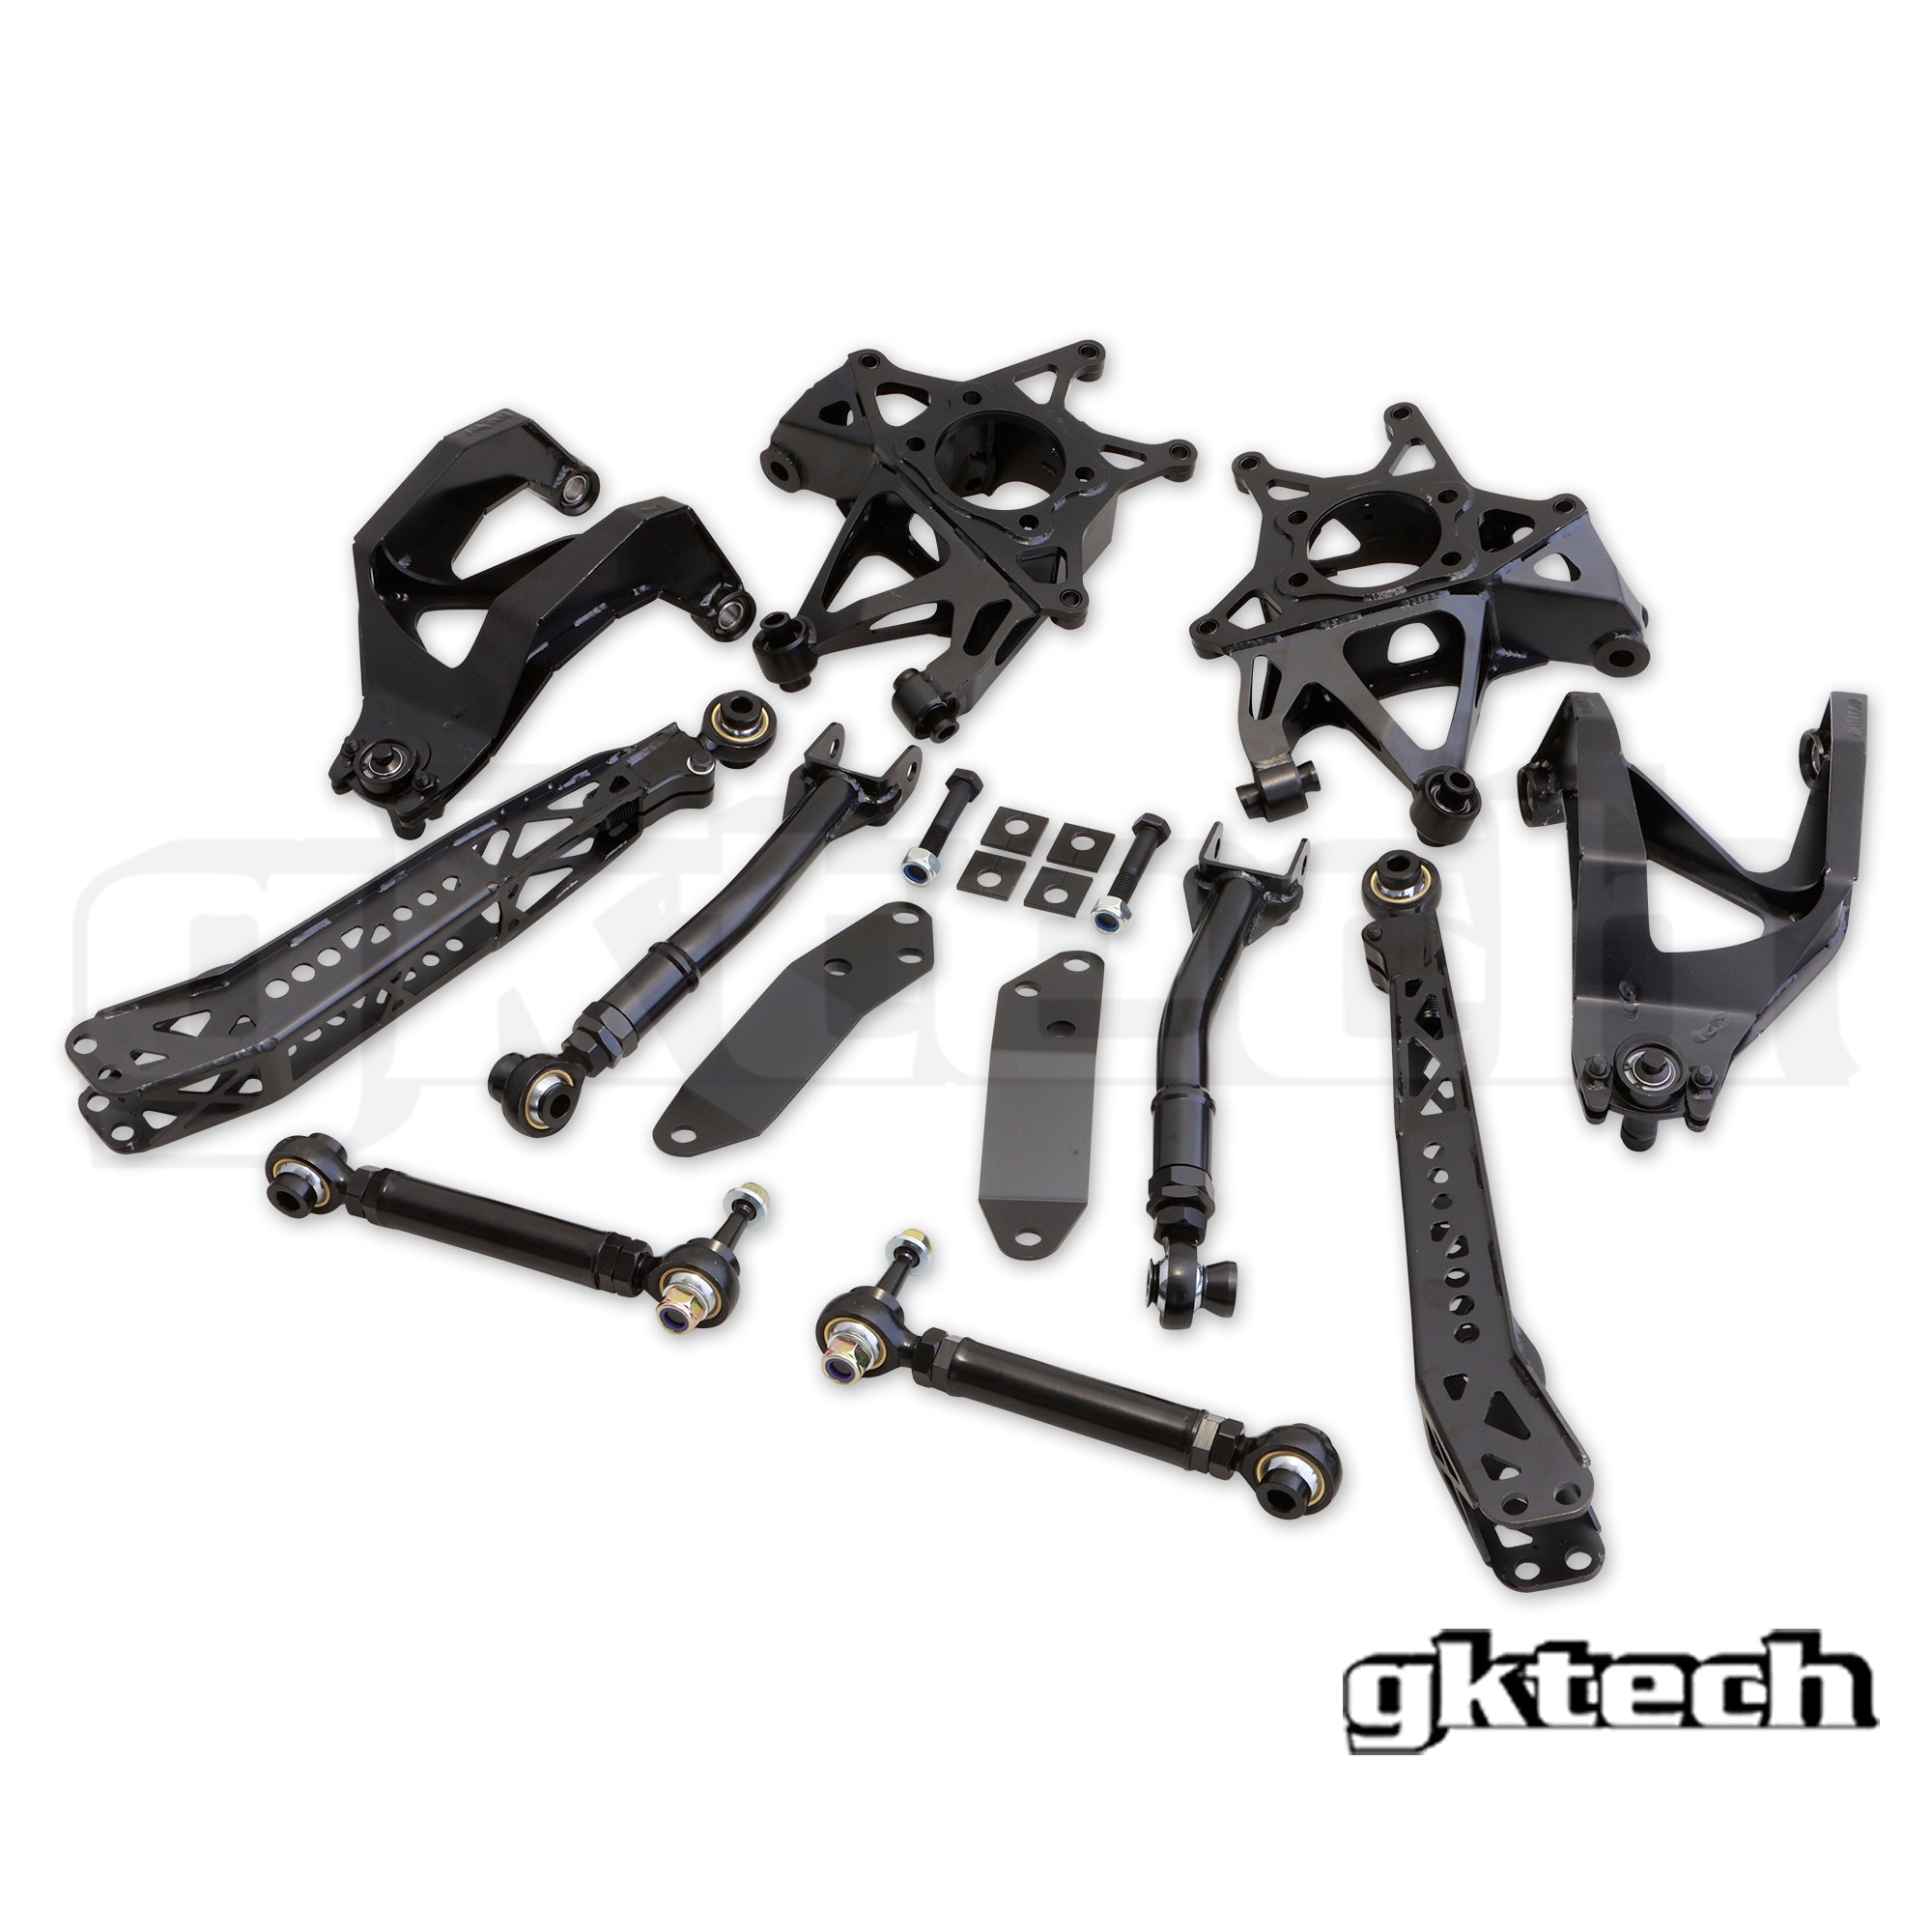 86 / GR86 / BRZ rear suspension package (20% combo discount)